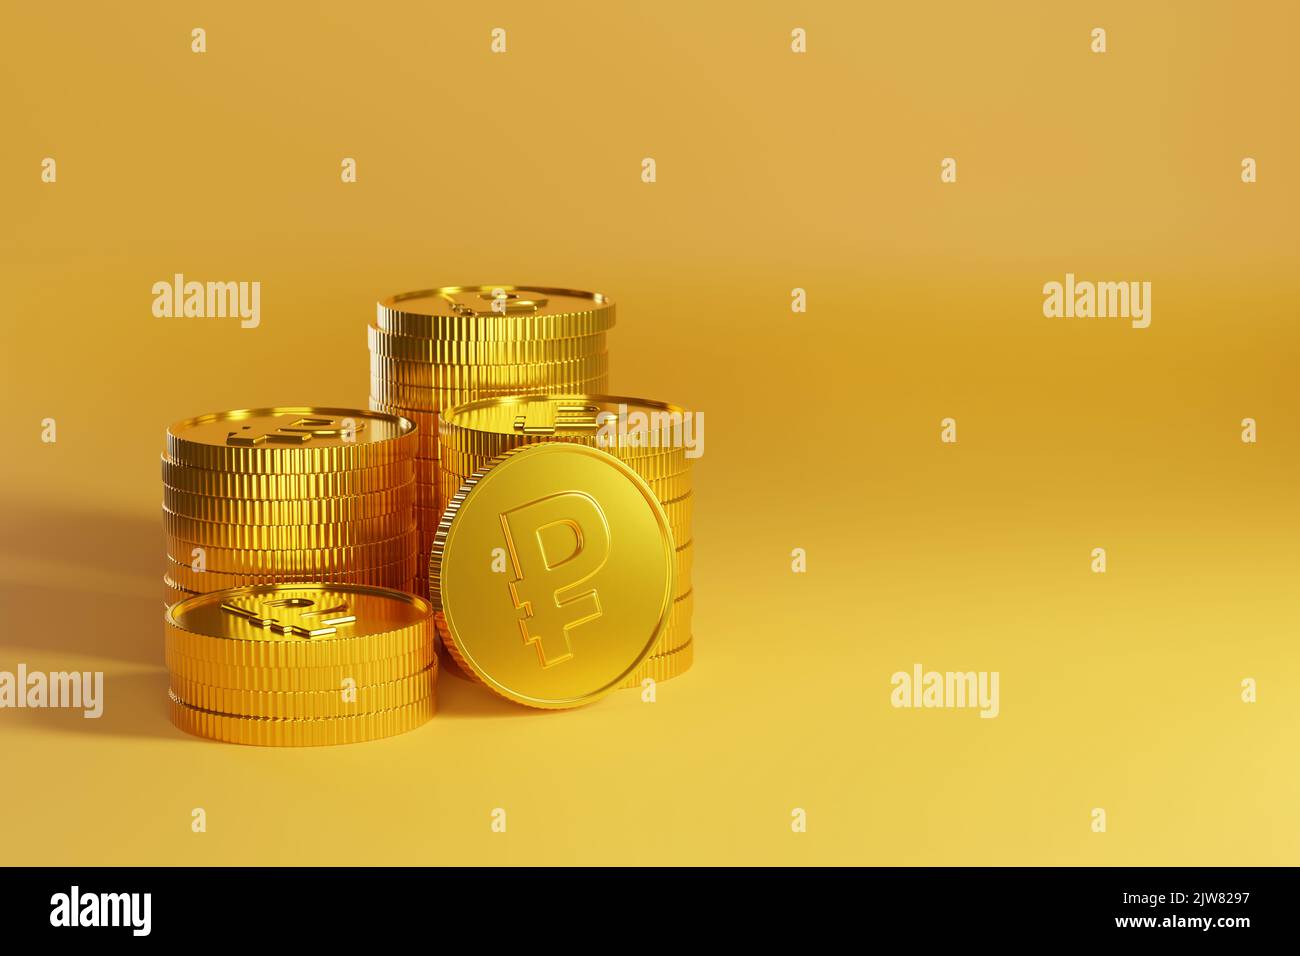 Golden coins with ruble sign on yellow background with copy space. 3d illustration. Stock Photo